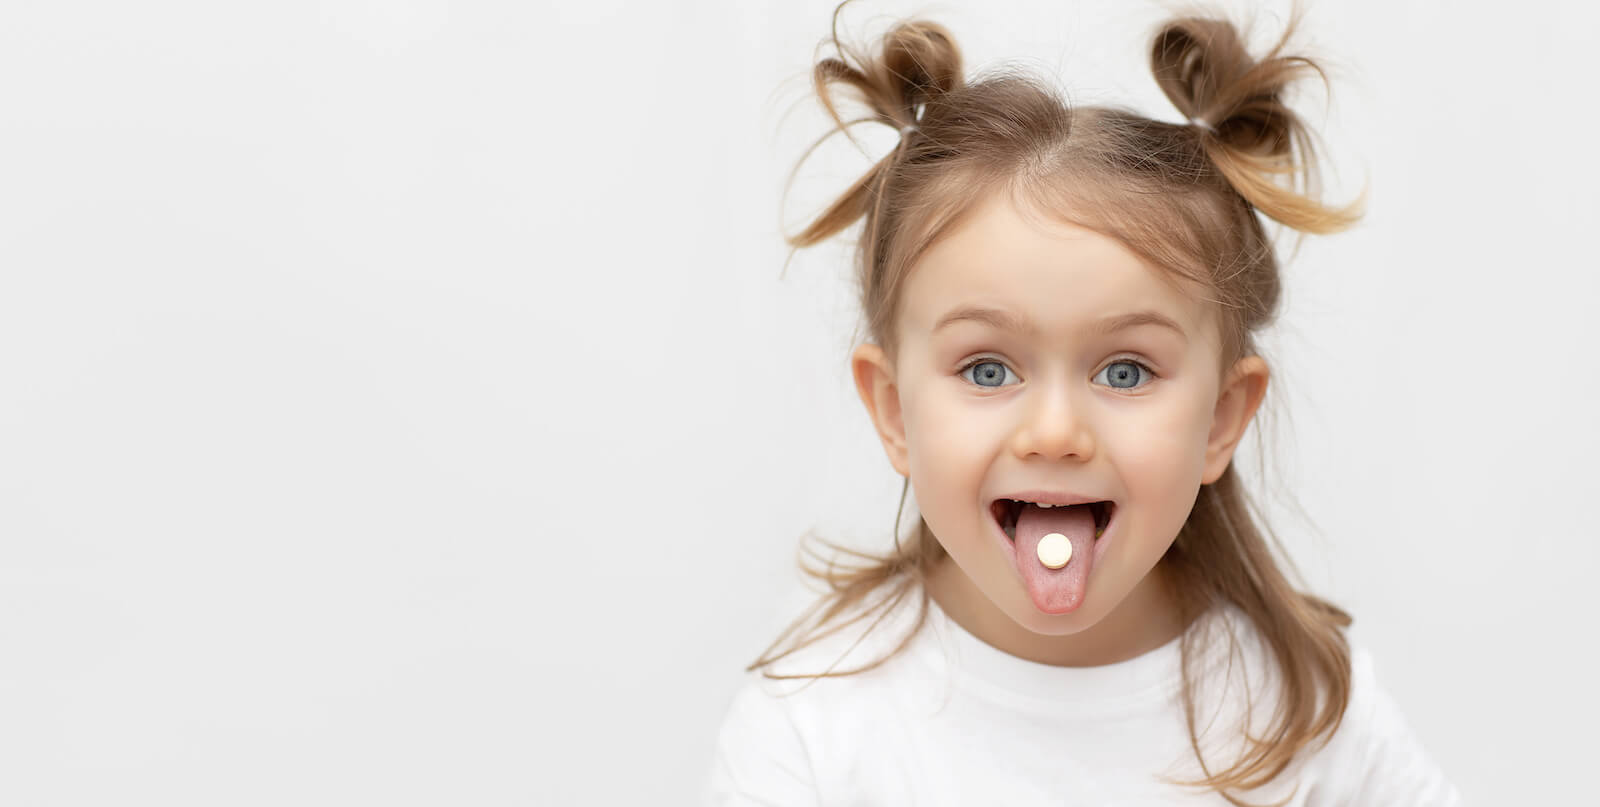 Kids probiotic: little girl showing a pill on her tongue